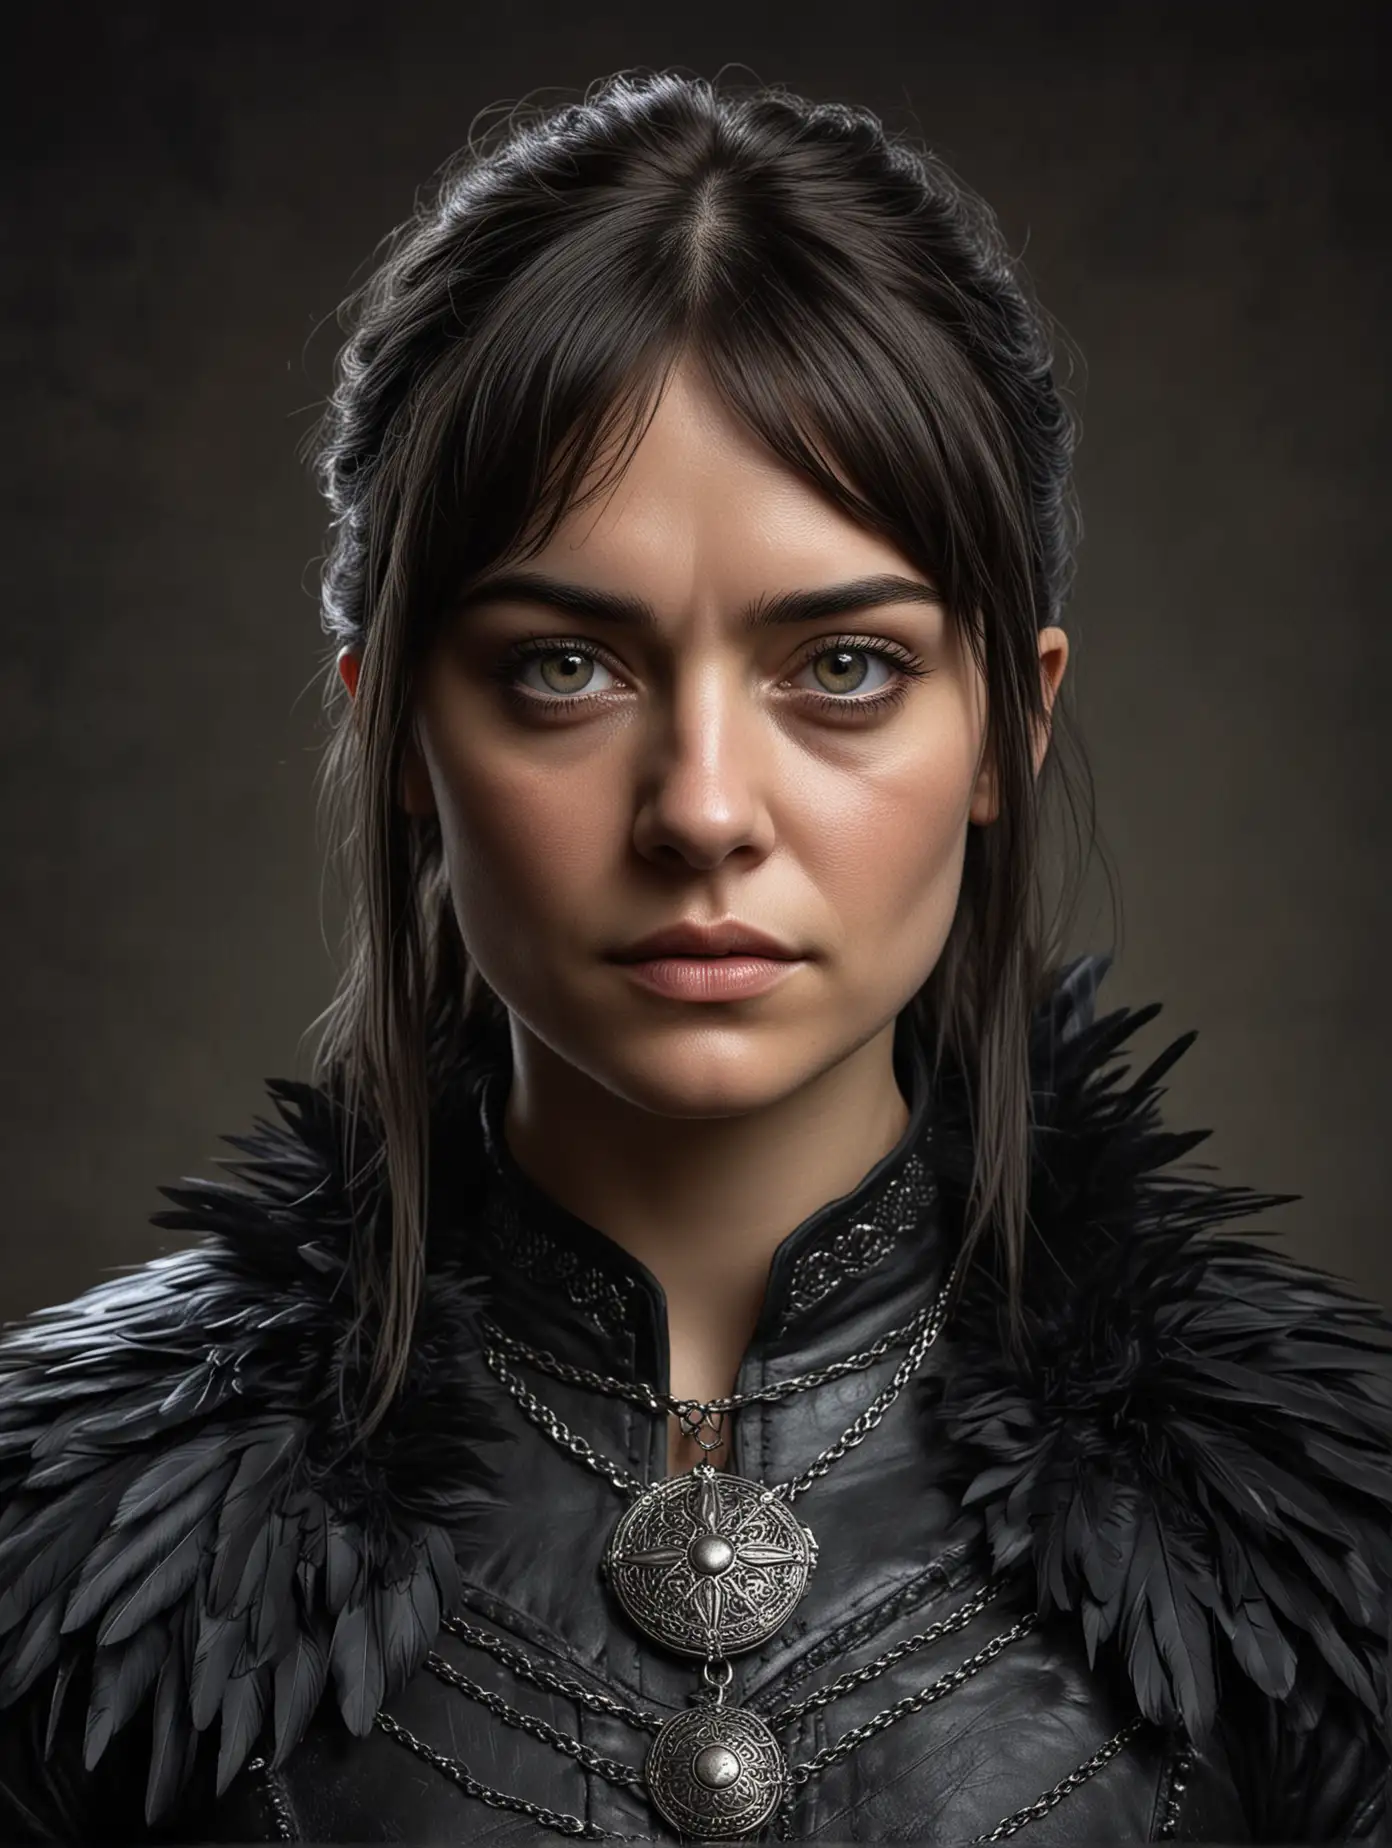 portrait of a mature 30 year old Arya Stark, game of thrones, detailed light grey eyes,black hair, black feathers, tribal necklaces,black clothes and leather armour, hyperrealistic painting inspired by lee jeffries, zbrush central contest winner, hyperrealism, steven mccurry portrait, photography alexey gurylev, alessio albi